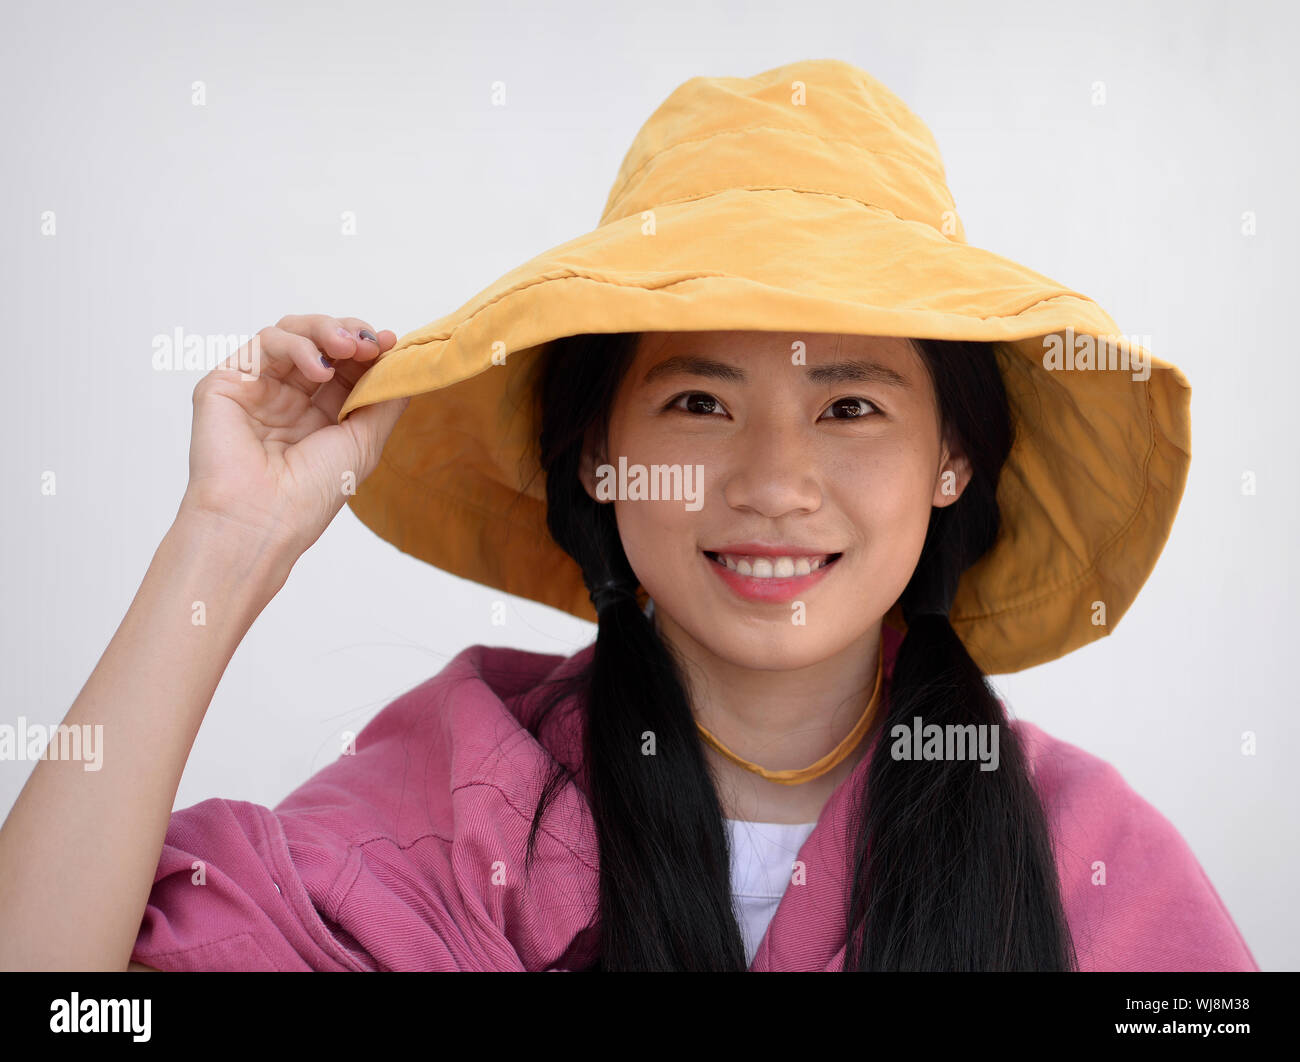 Pretty Thai girl with a yellow floppy hat smiles for the camera. Stock Photo